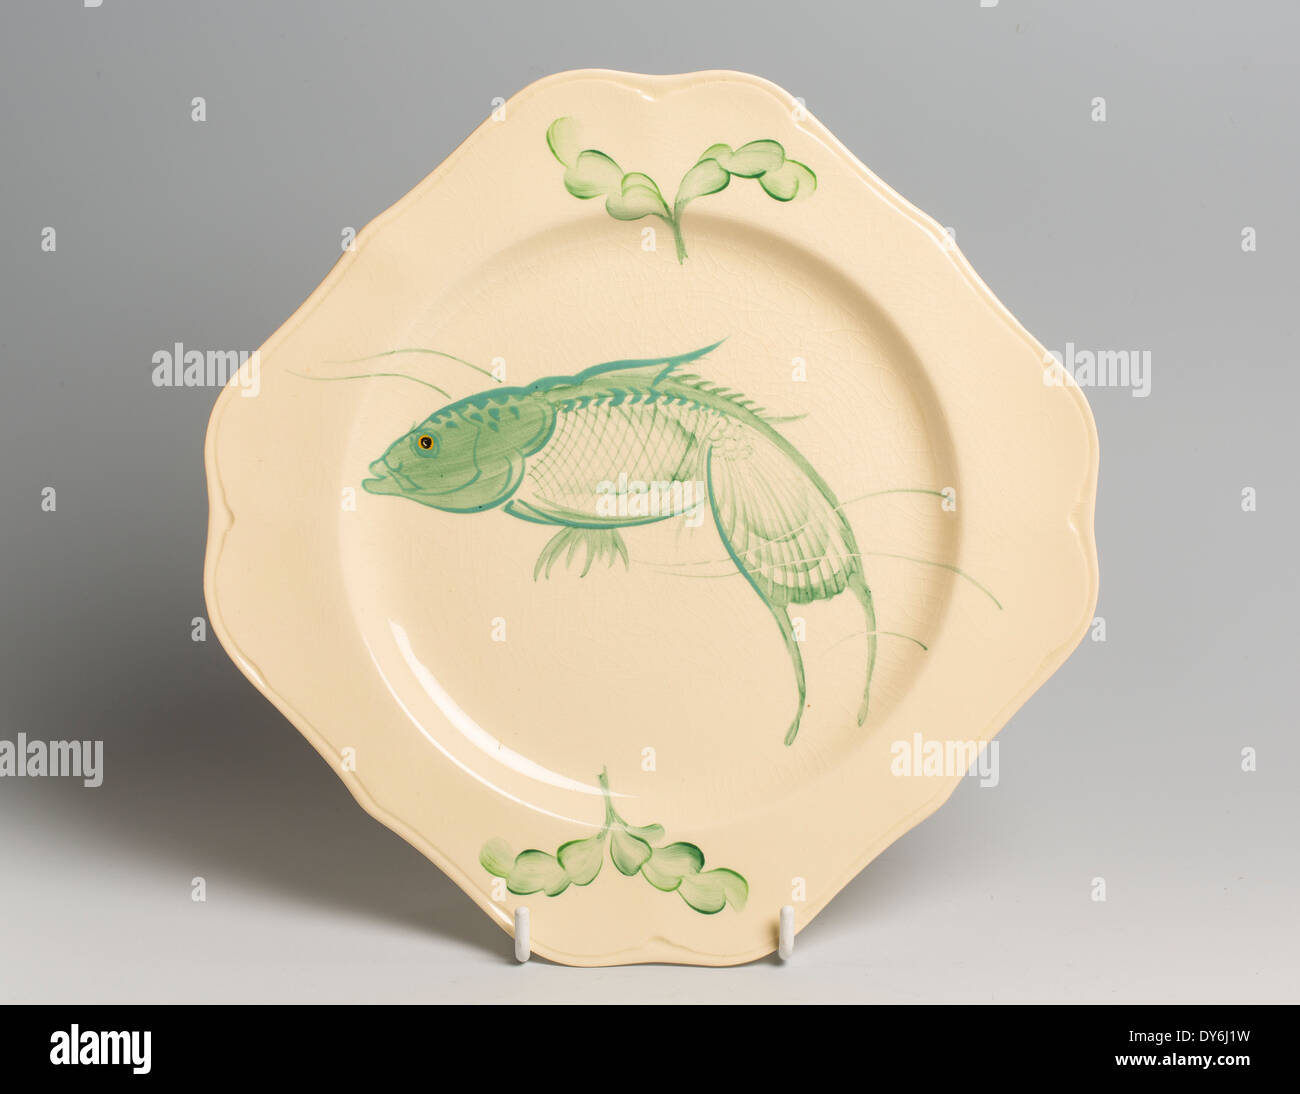 Gray's plate from the 1930s with a hand painted design of a fish Stock Photo